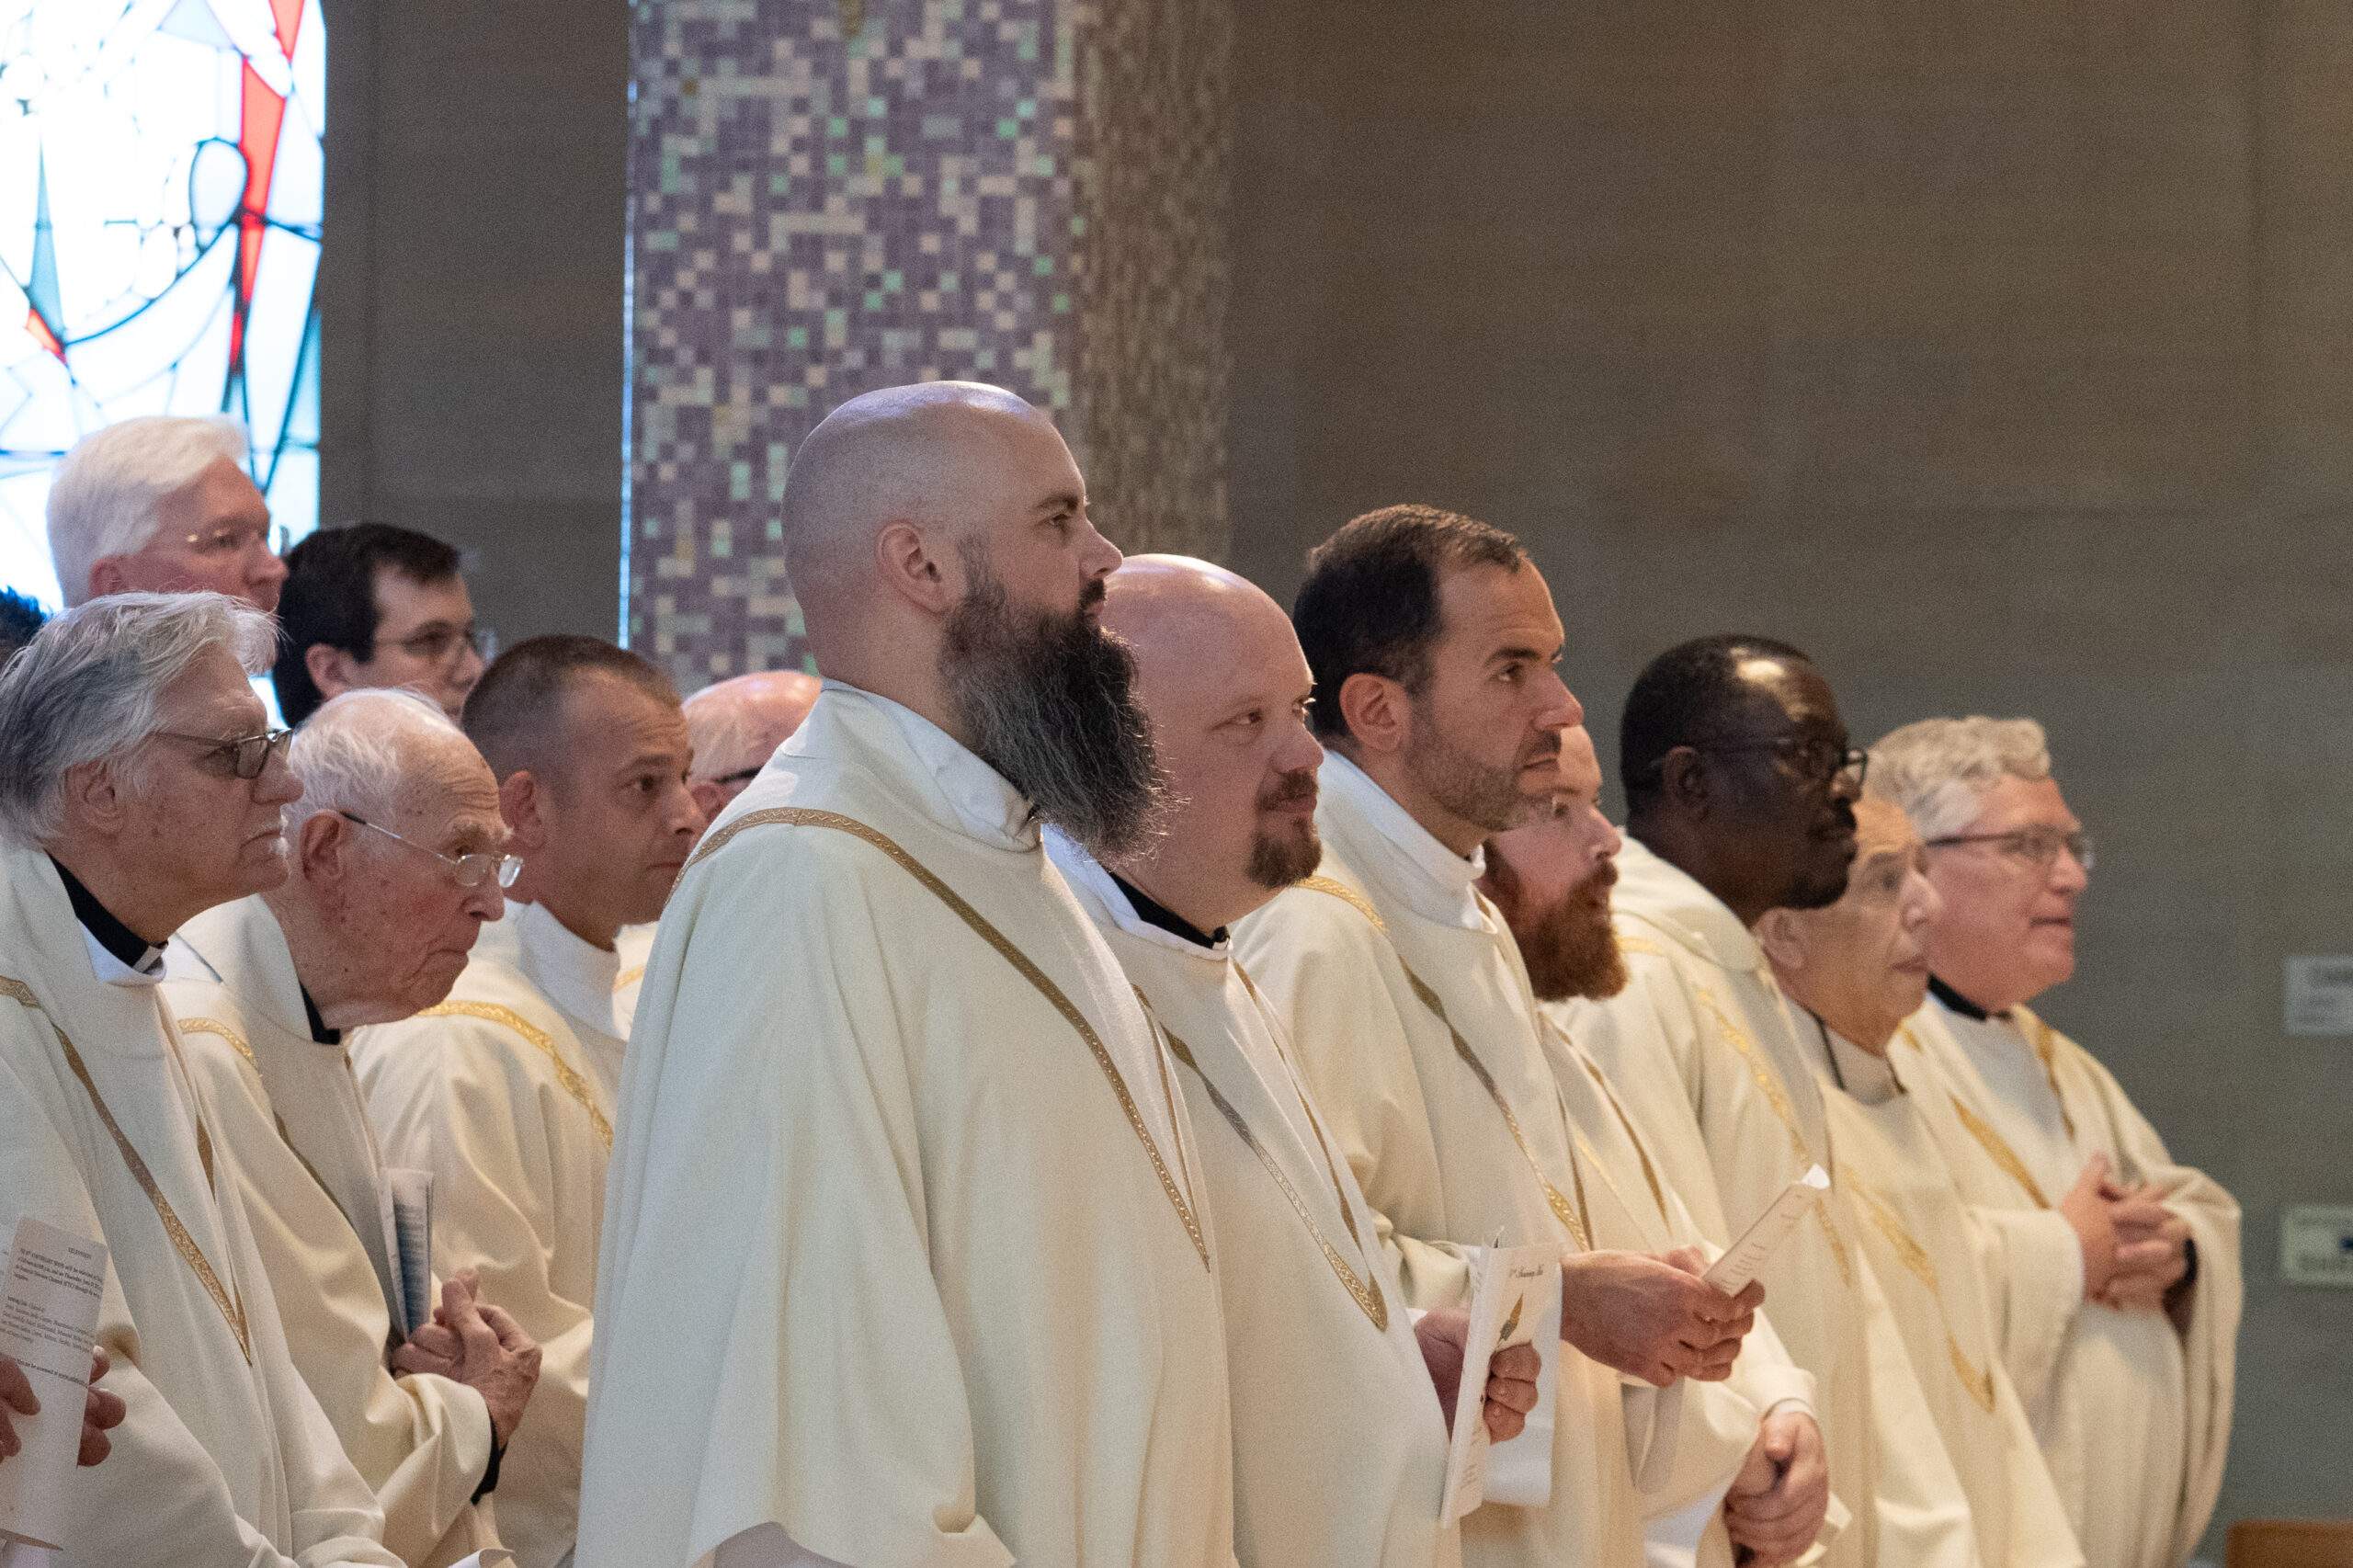 Priests stand during Mass